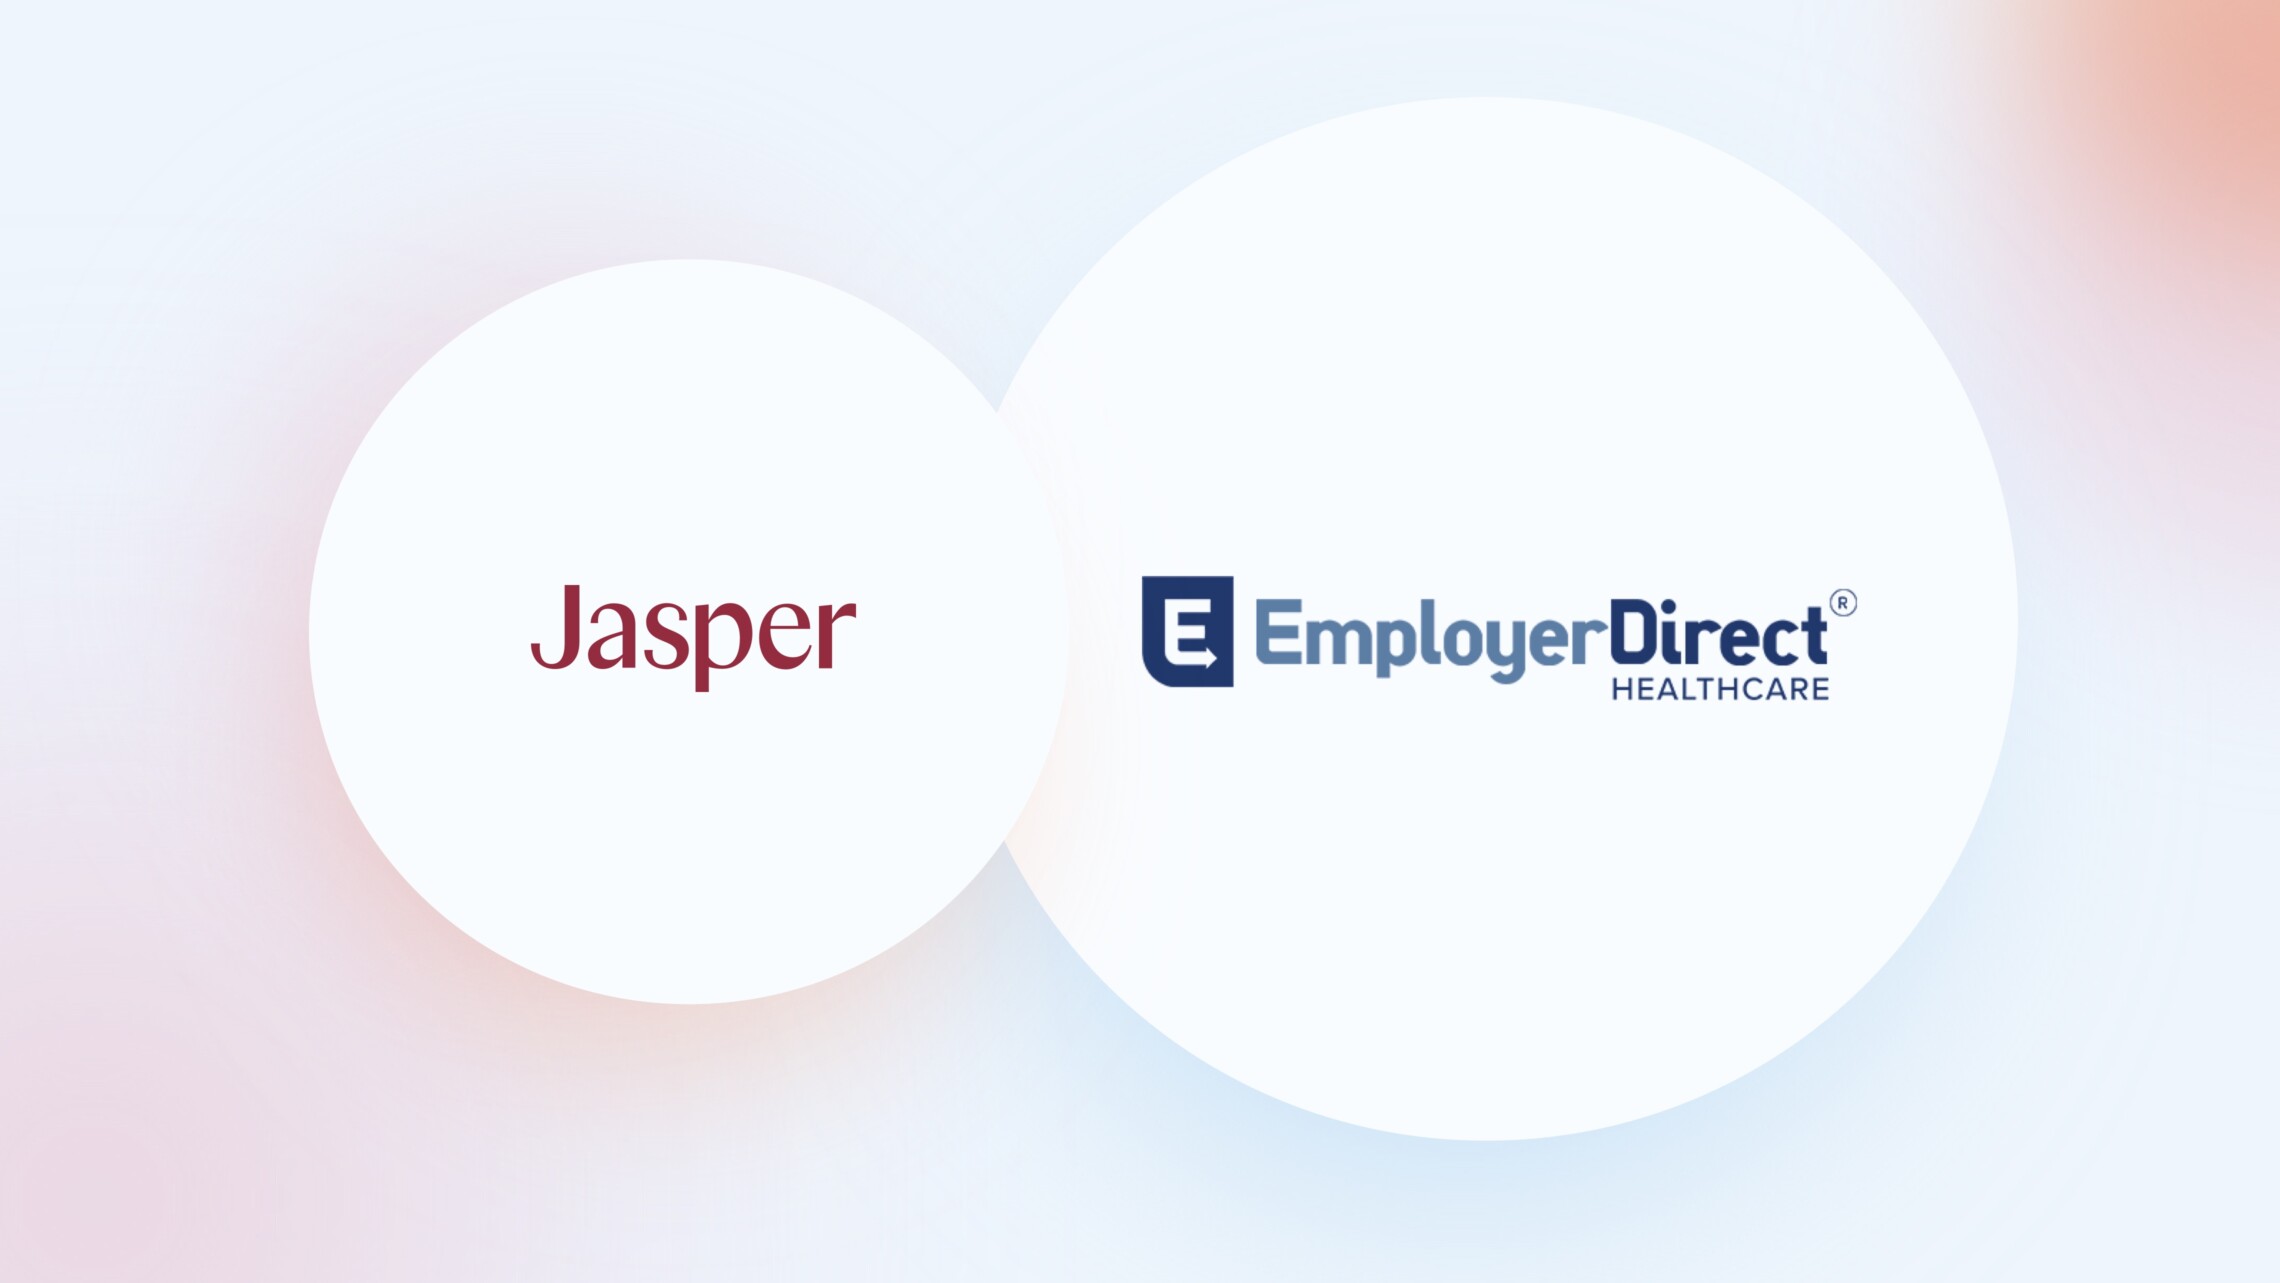 Jasper logo and Employer Direct Healthcare logo in two white circles